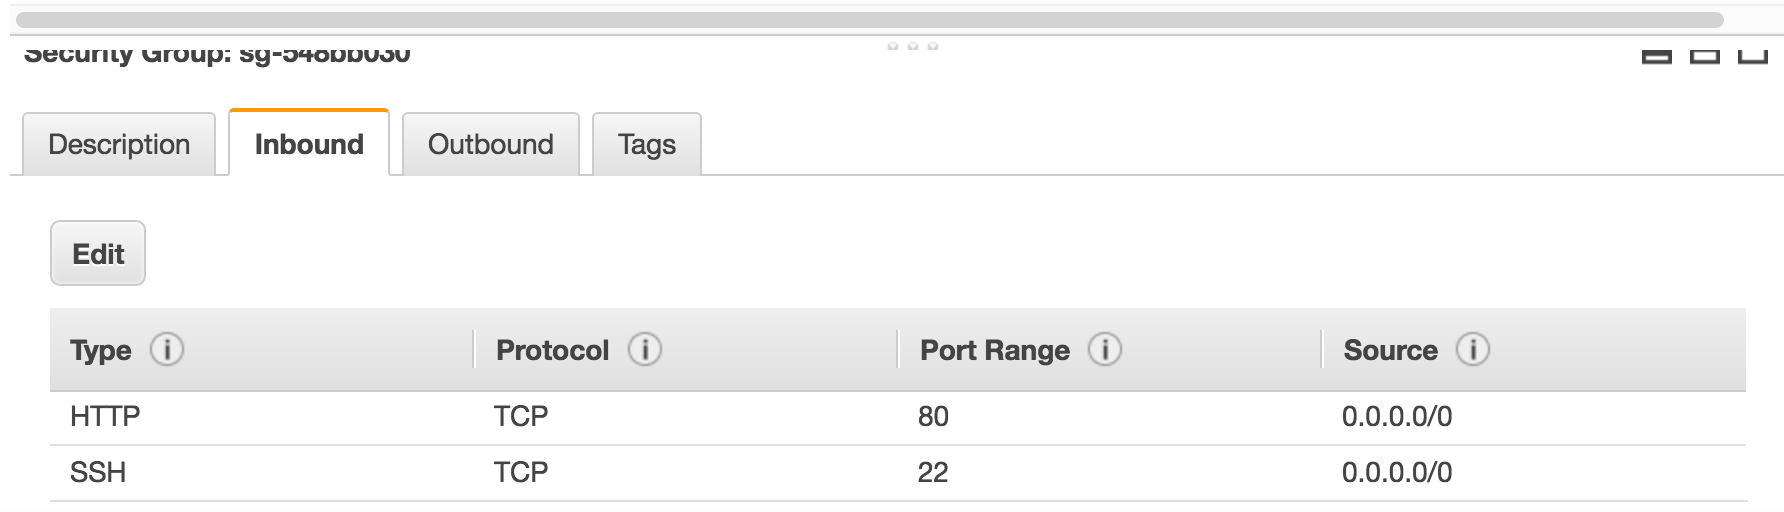 HTTP port (80) and SSH port (22) are set up to allow all incoming requests